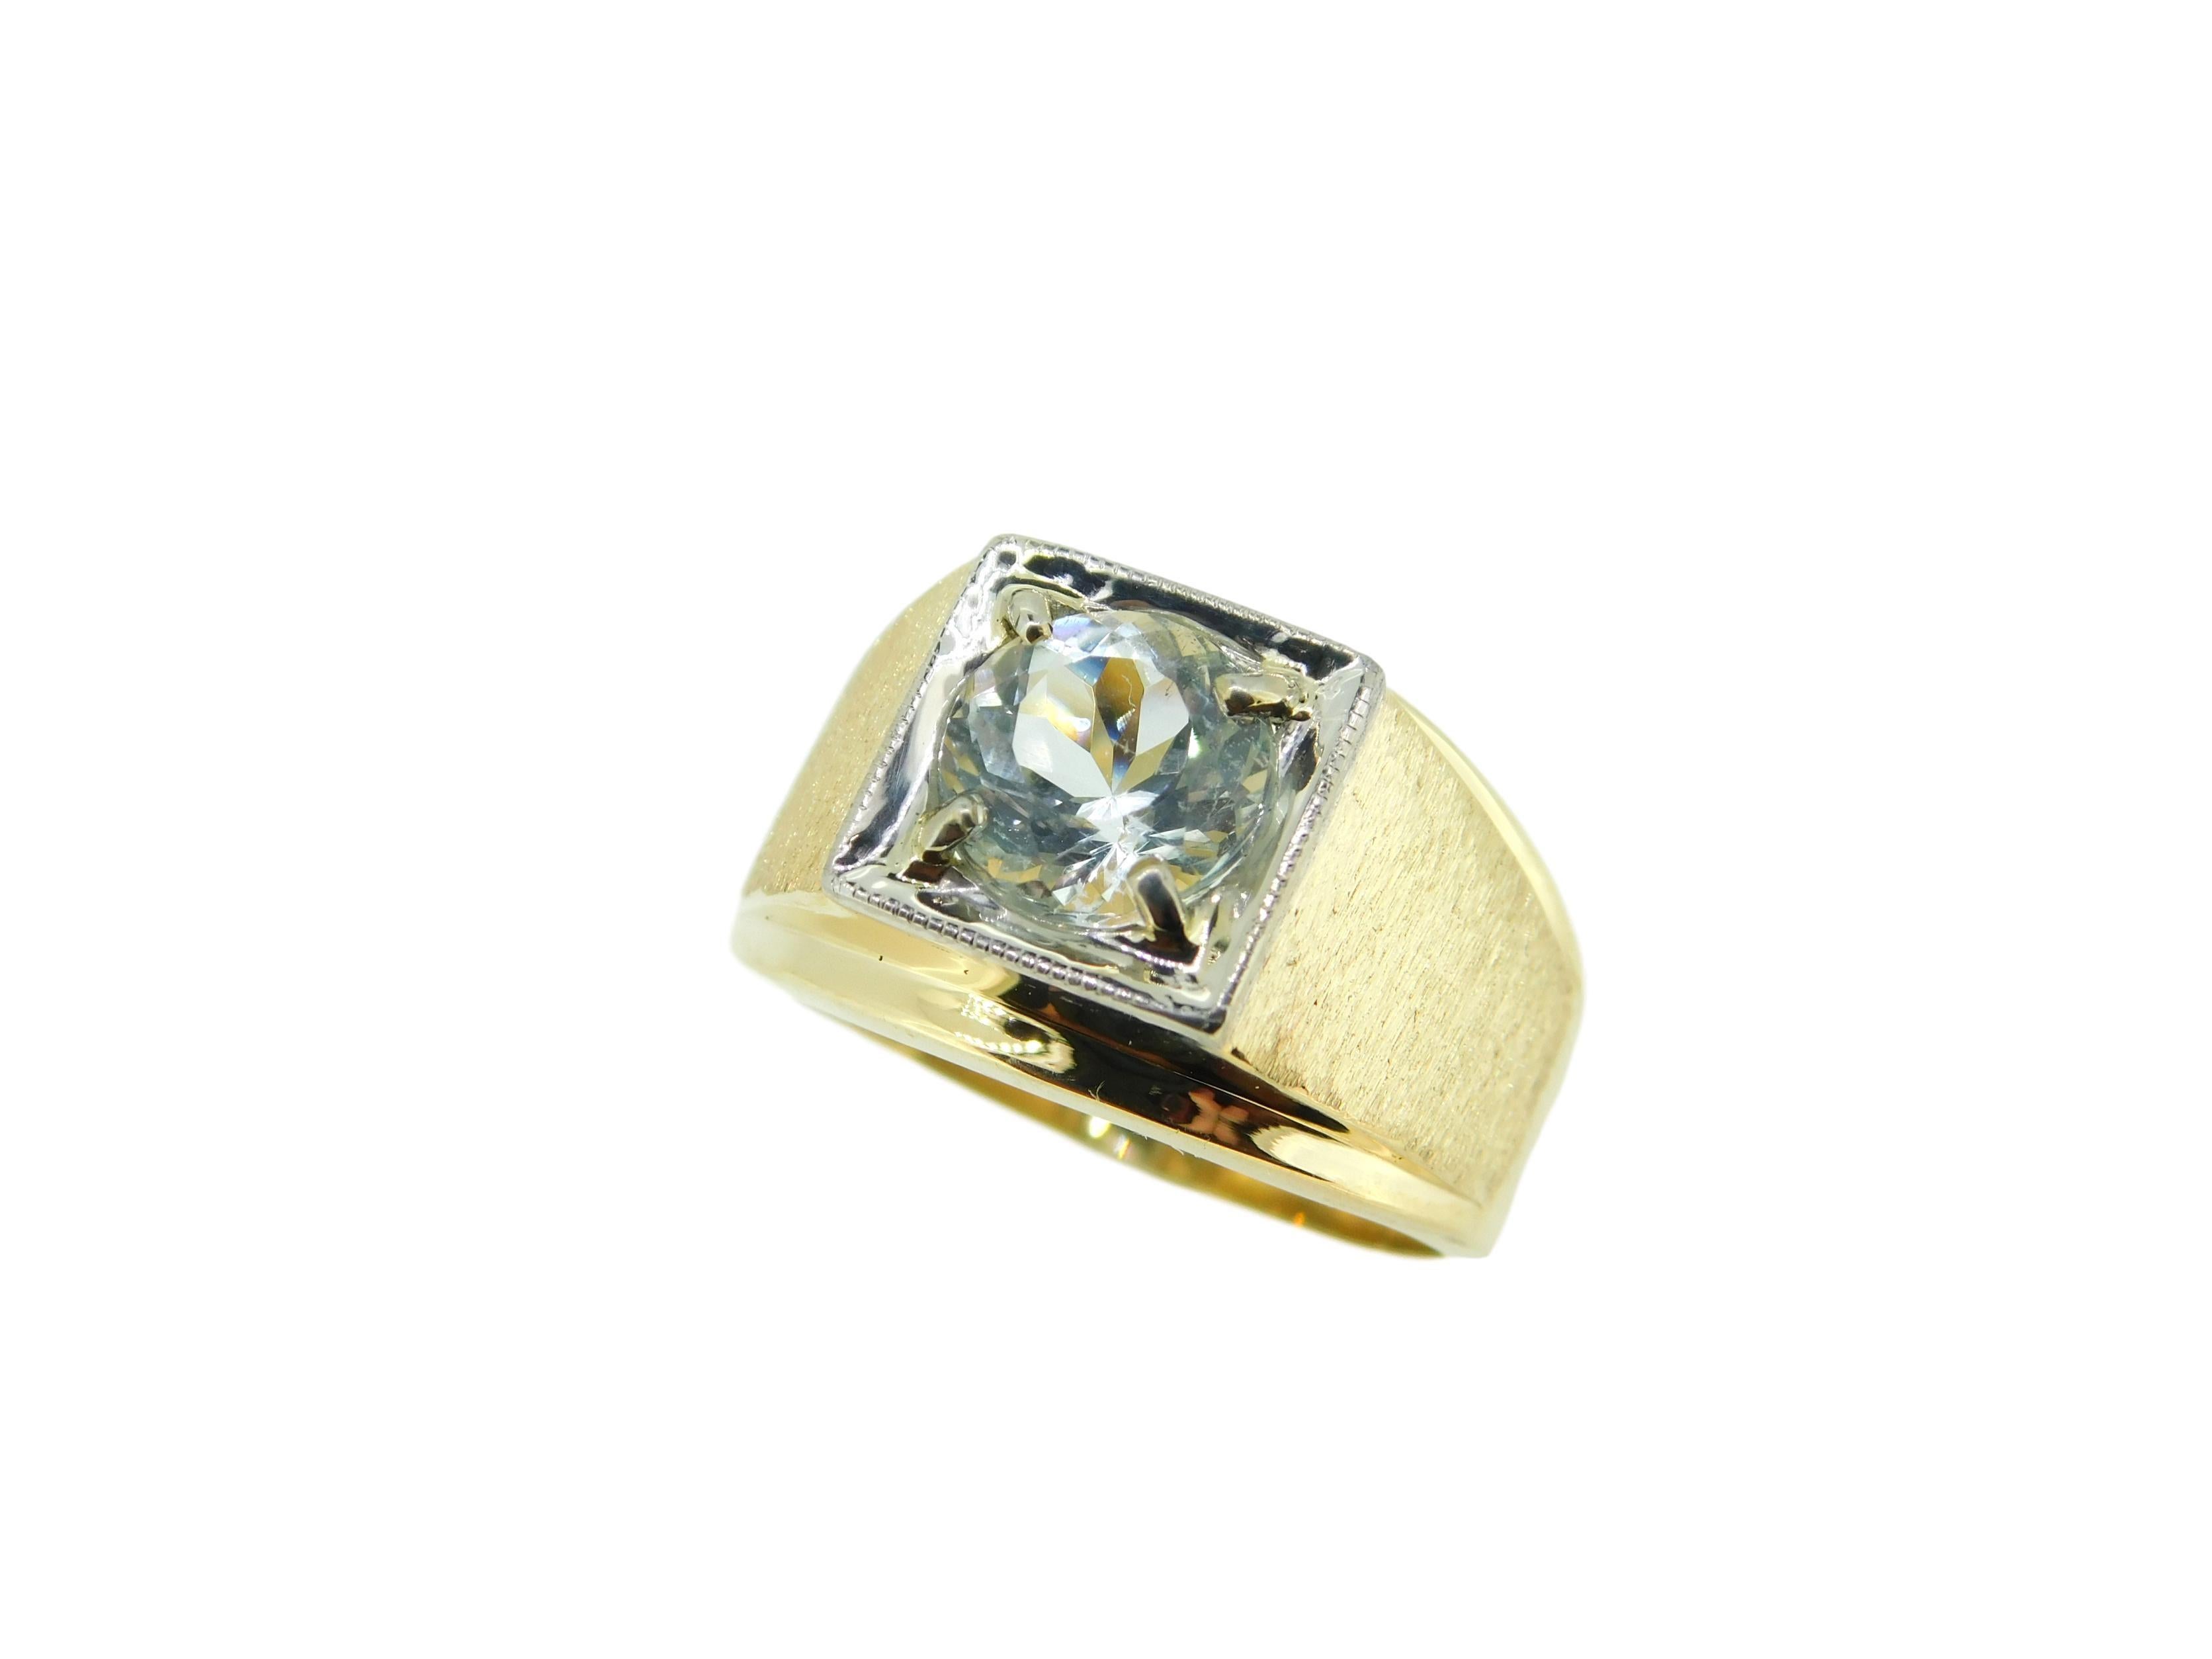 14k Yellow Gold and Platinum Men's Genuine Natural Aquamarine Ring (#J4724)

14k yellow gold men's ring with a platinum head set with a pale icy blue round aquamarine. The aqua weighs 2.26 carats and measures about 8.3mm. The sides of the band have